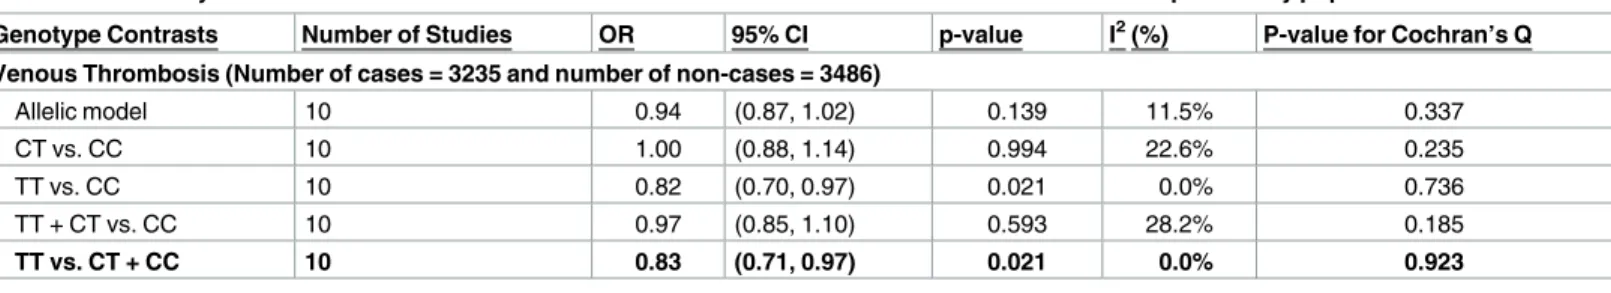 Table 4. Meta-analysis of the association between Thr325Ile variant and risk of venous thrombosis in European study populations.